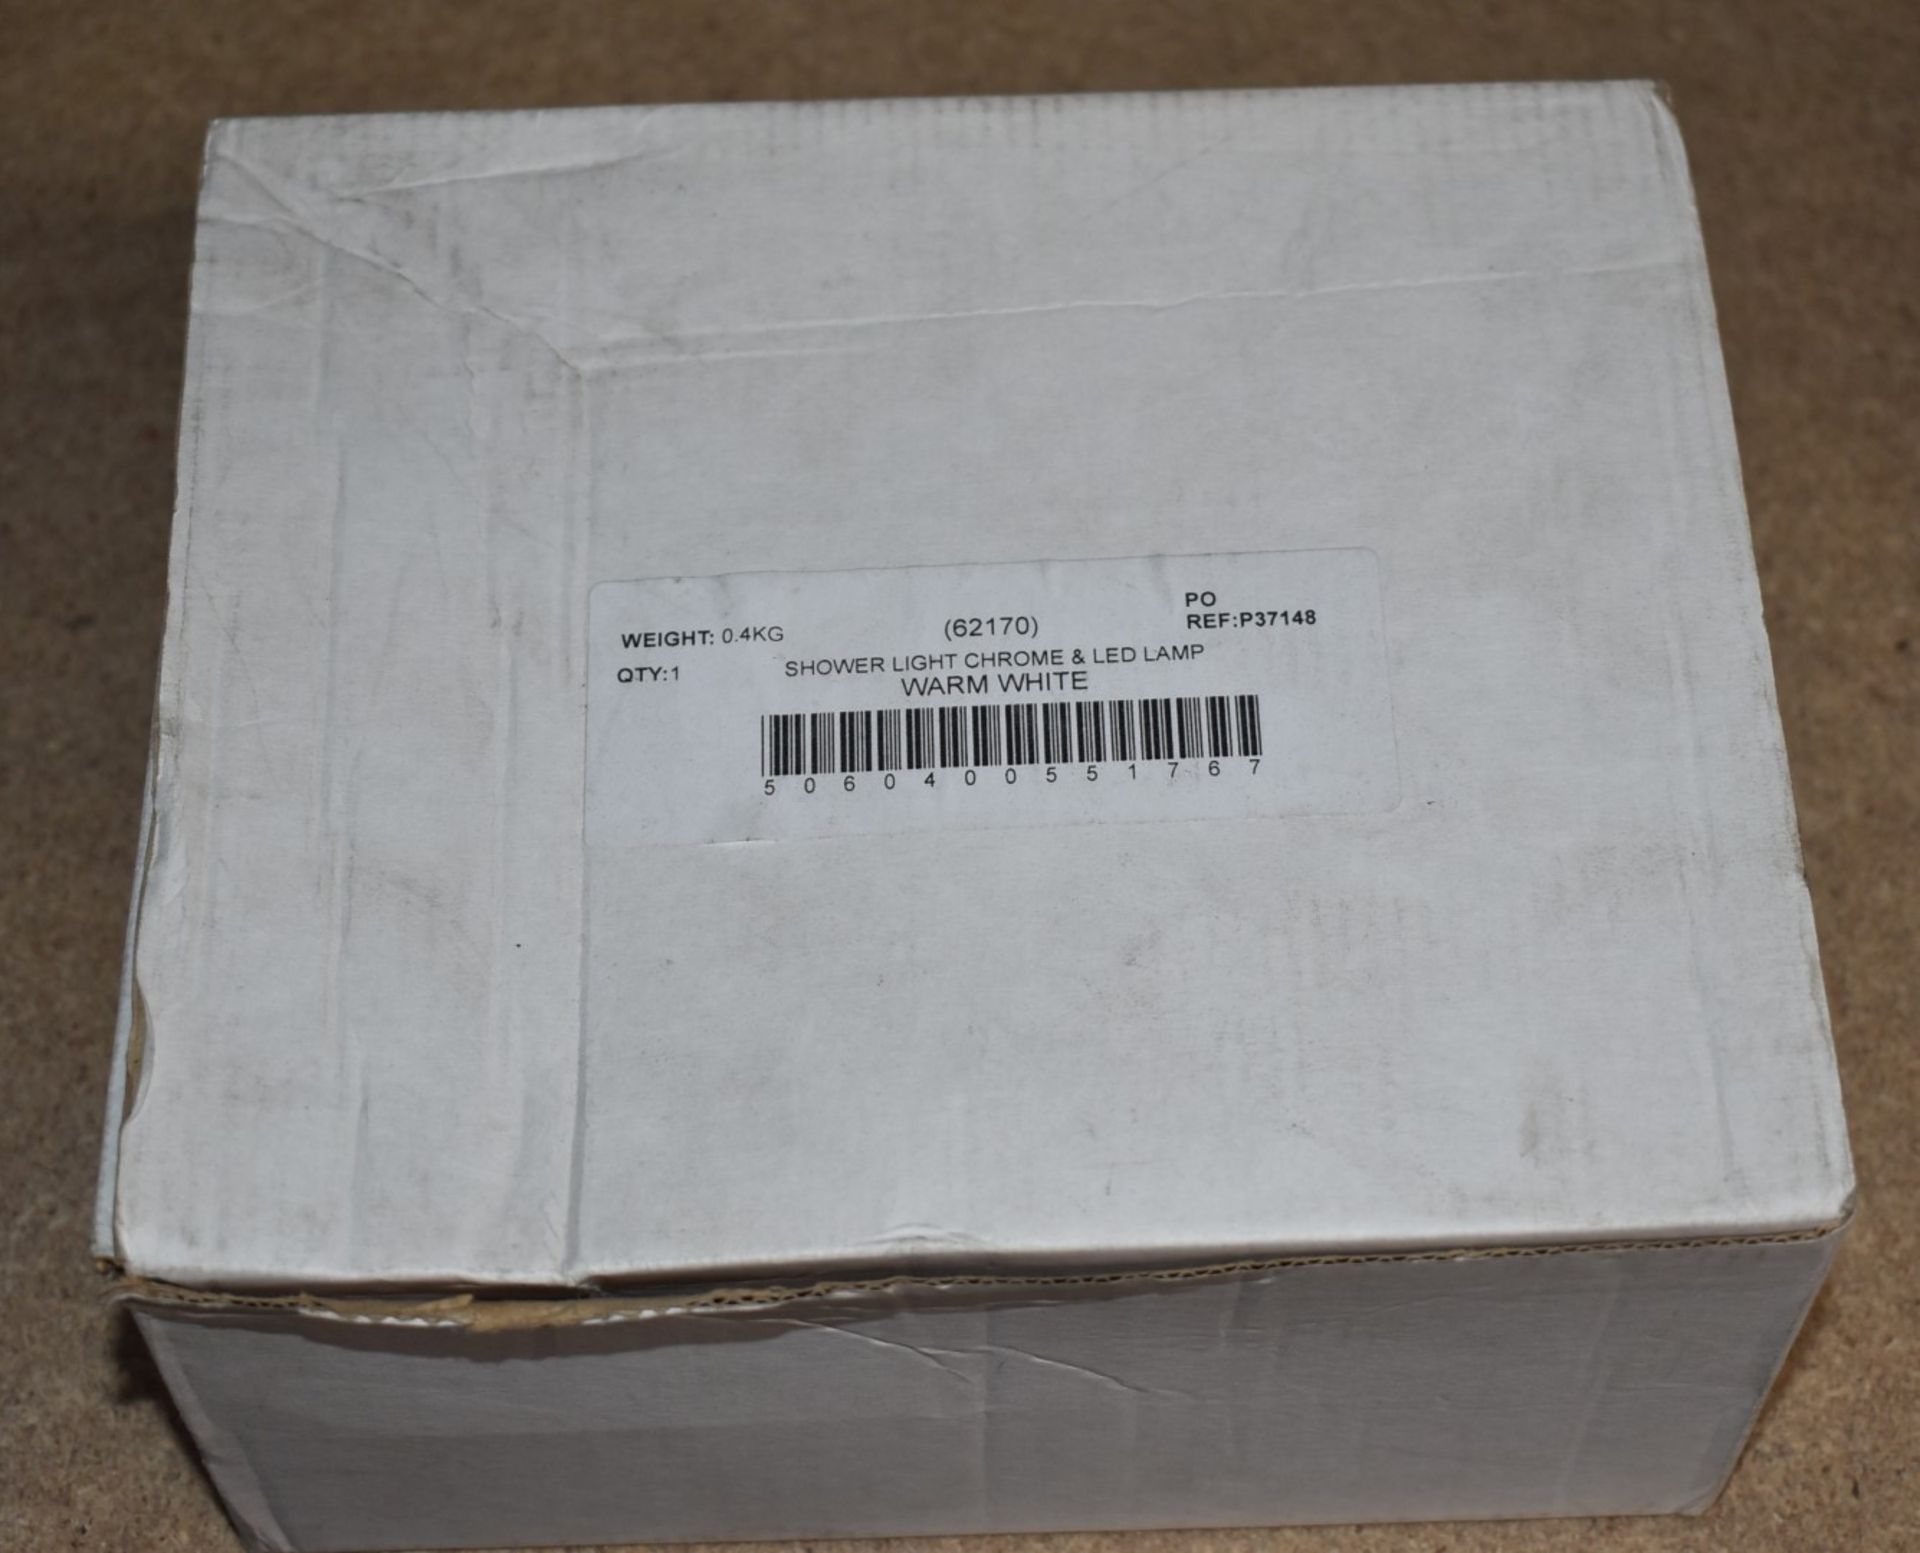 1 x Chrome Shower Light With Warm White LED Lamp - Unused Boxed Stock - CL011 - Ref: 62170 - - Image 2 of 3